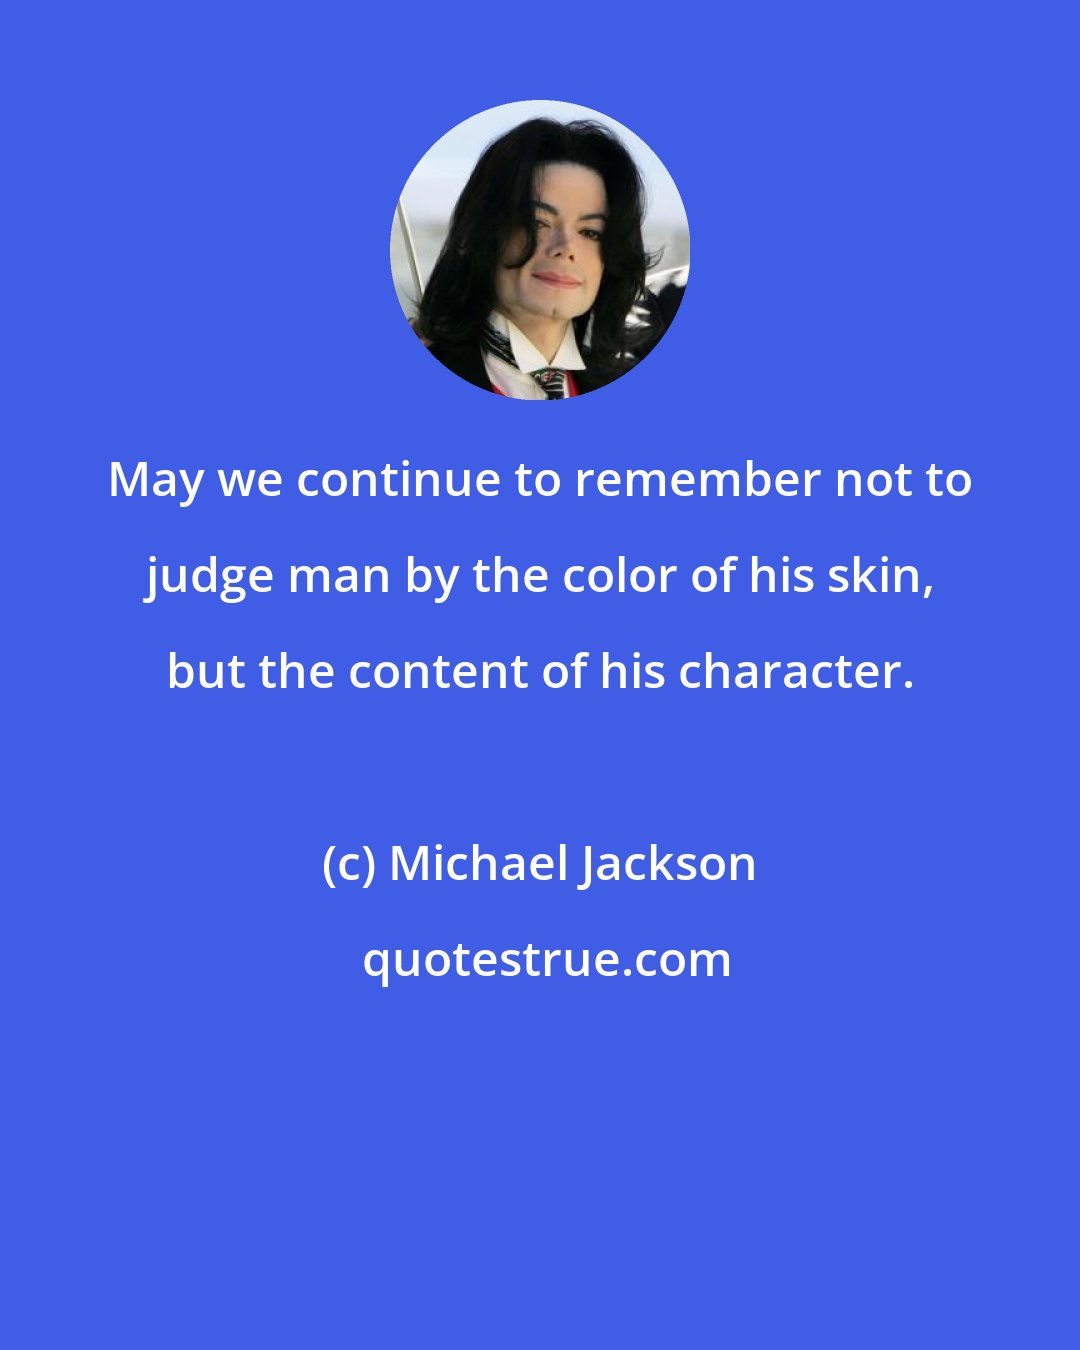 Michael Jackson: May we continue to remember not to judge man by the color of his skin, but the content of his character.